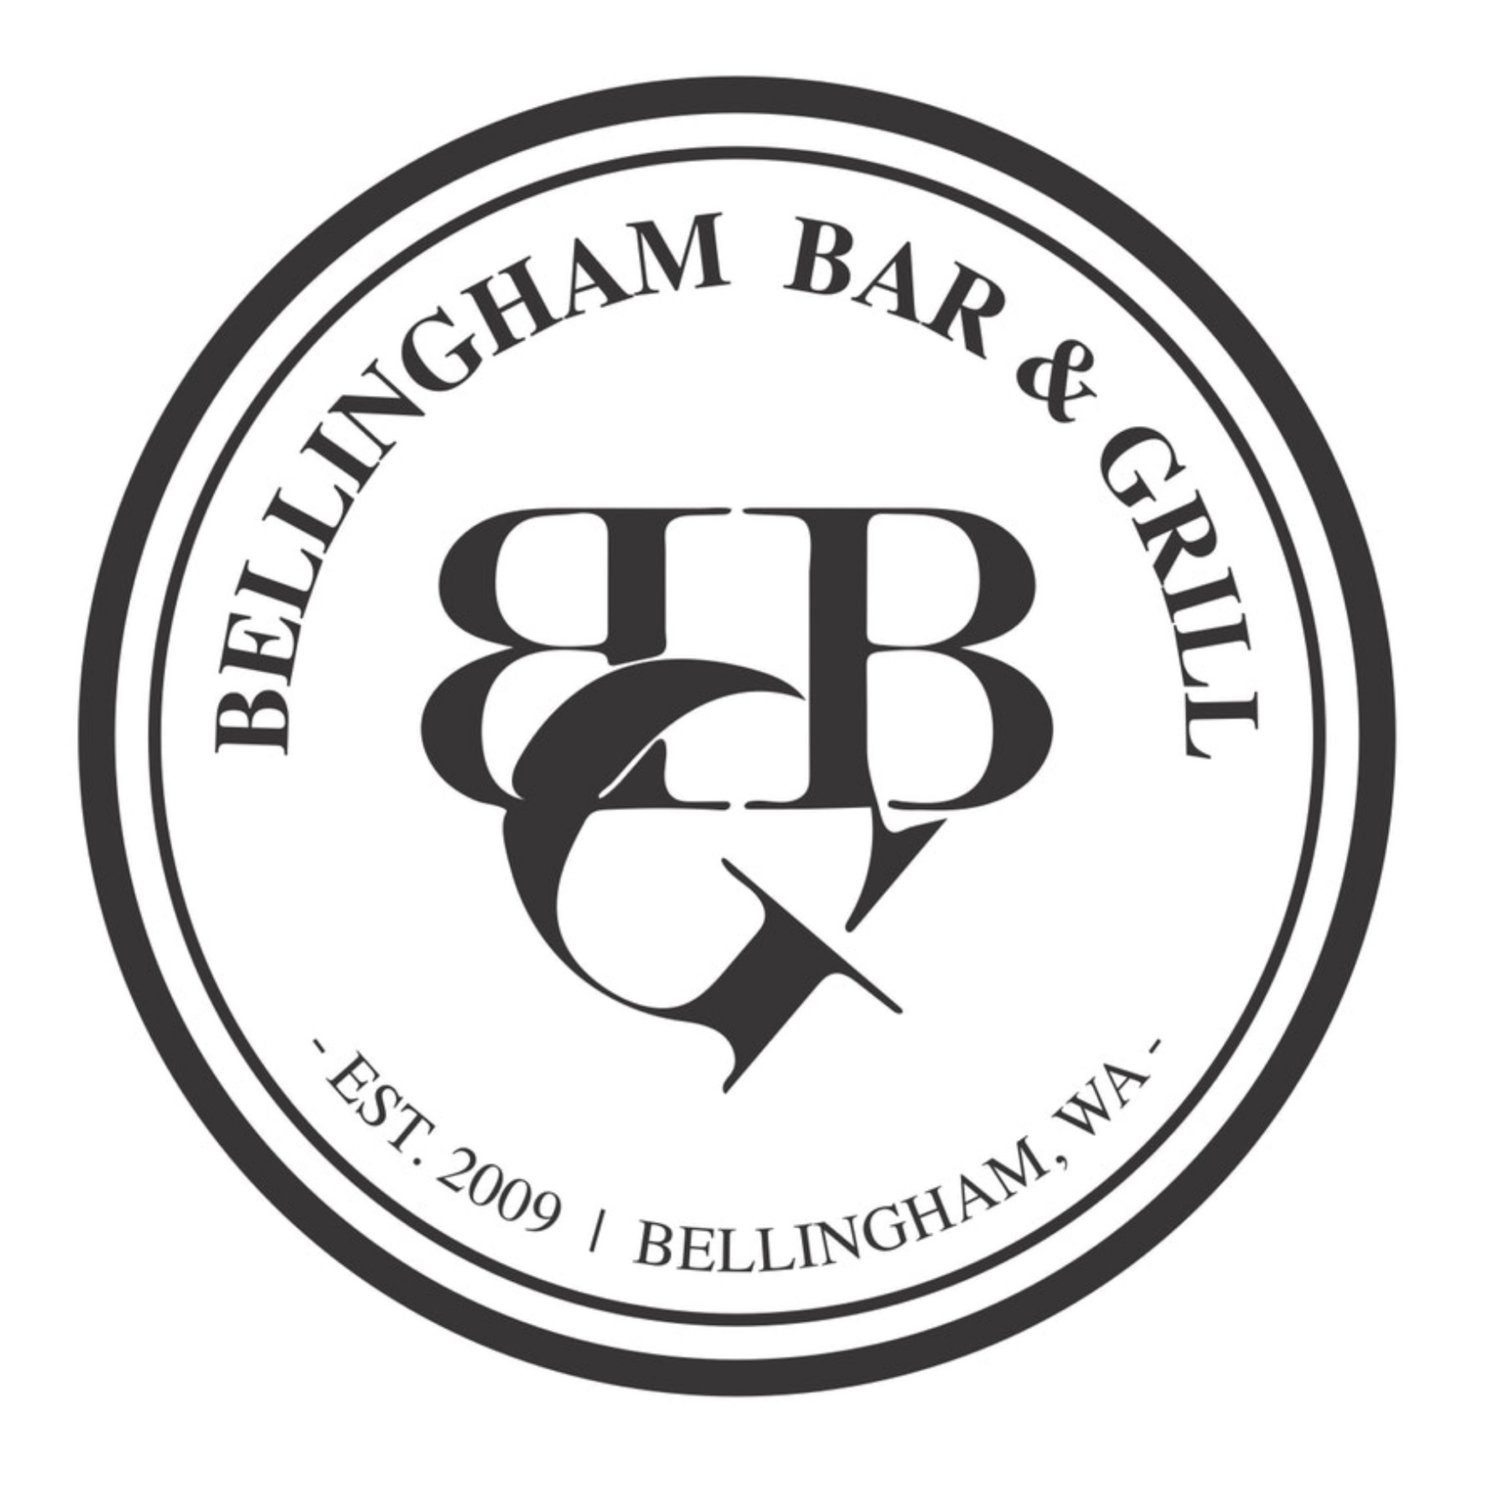 Contact — Bellingham Bar and Grill